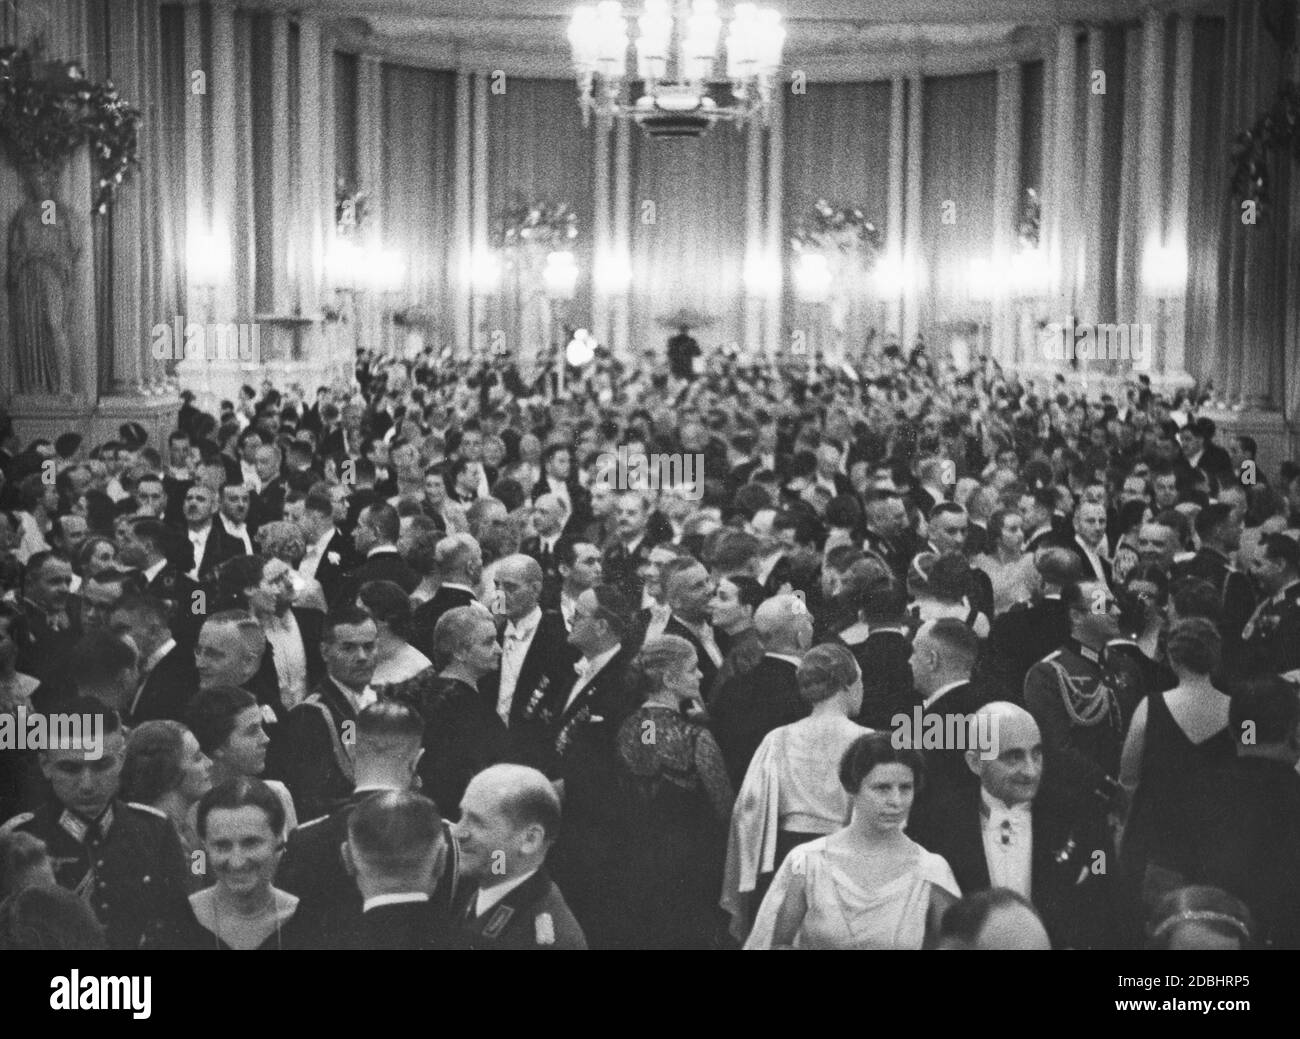 On January 12, 1936, the Opera Ball of the Prussian State Theater was held at the Staatsoper Unter den Linden. The photograph shows the guests before the beginning of the event. Stock Photo